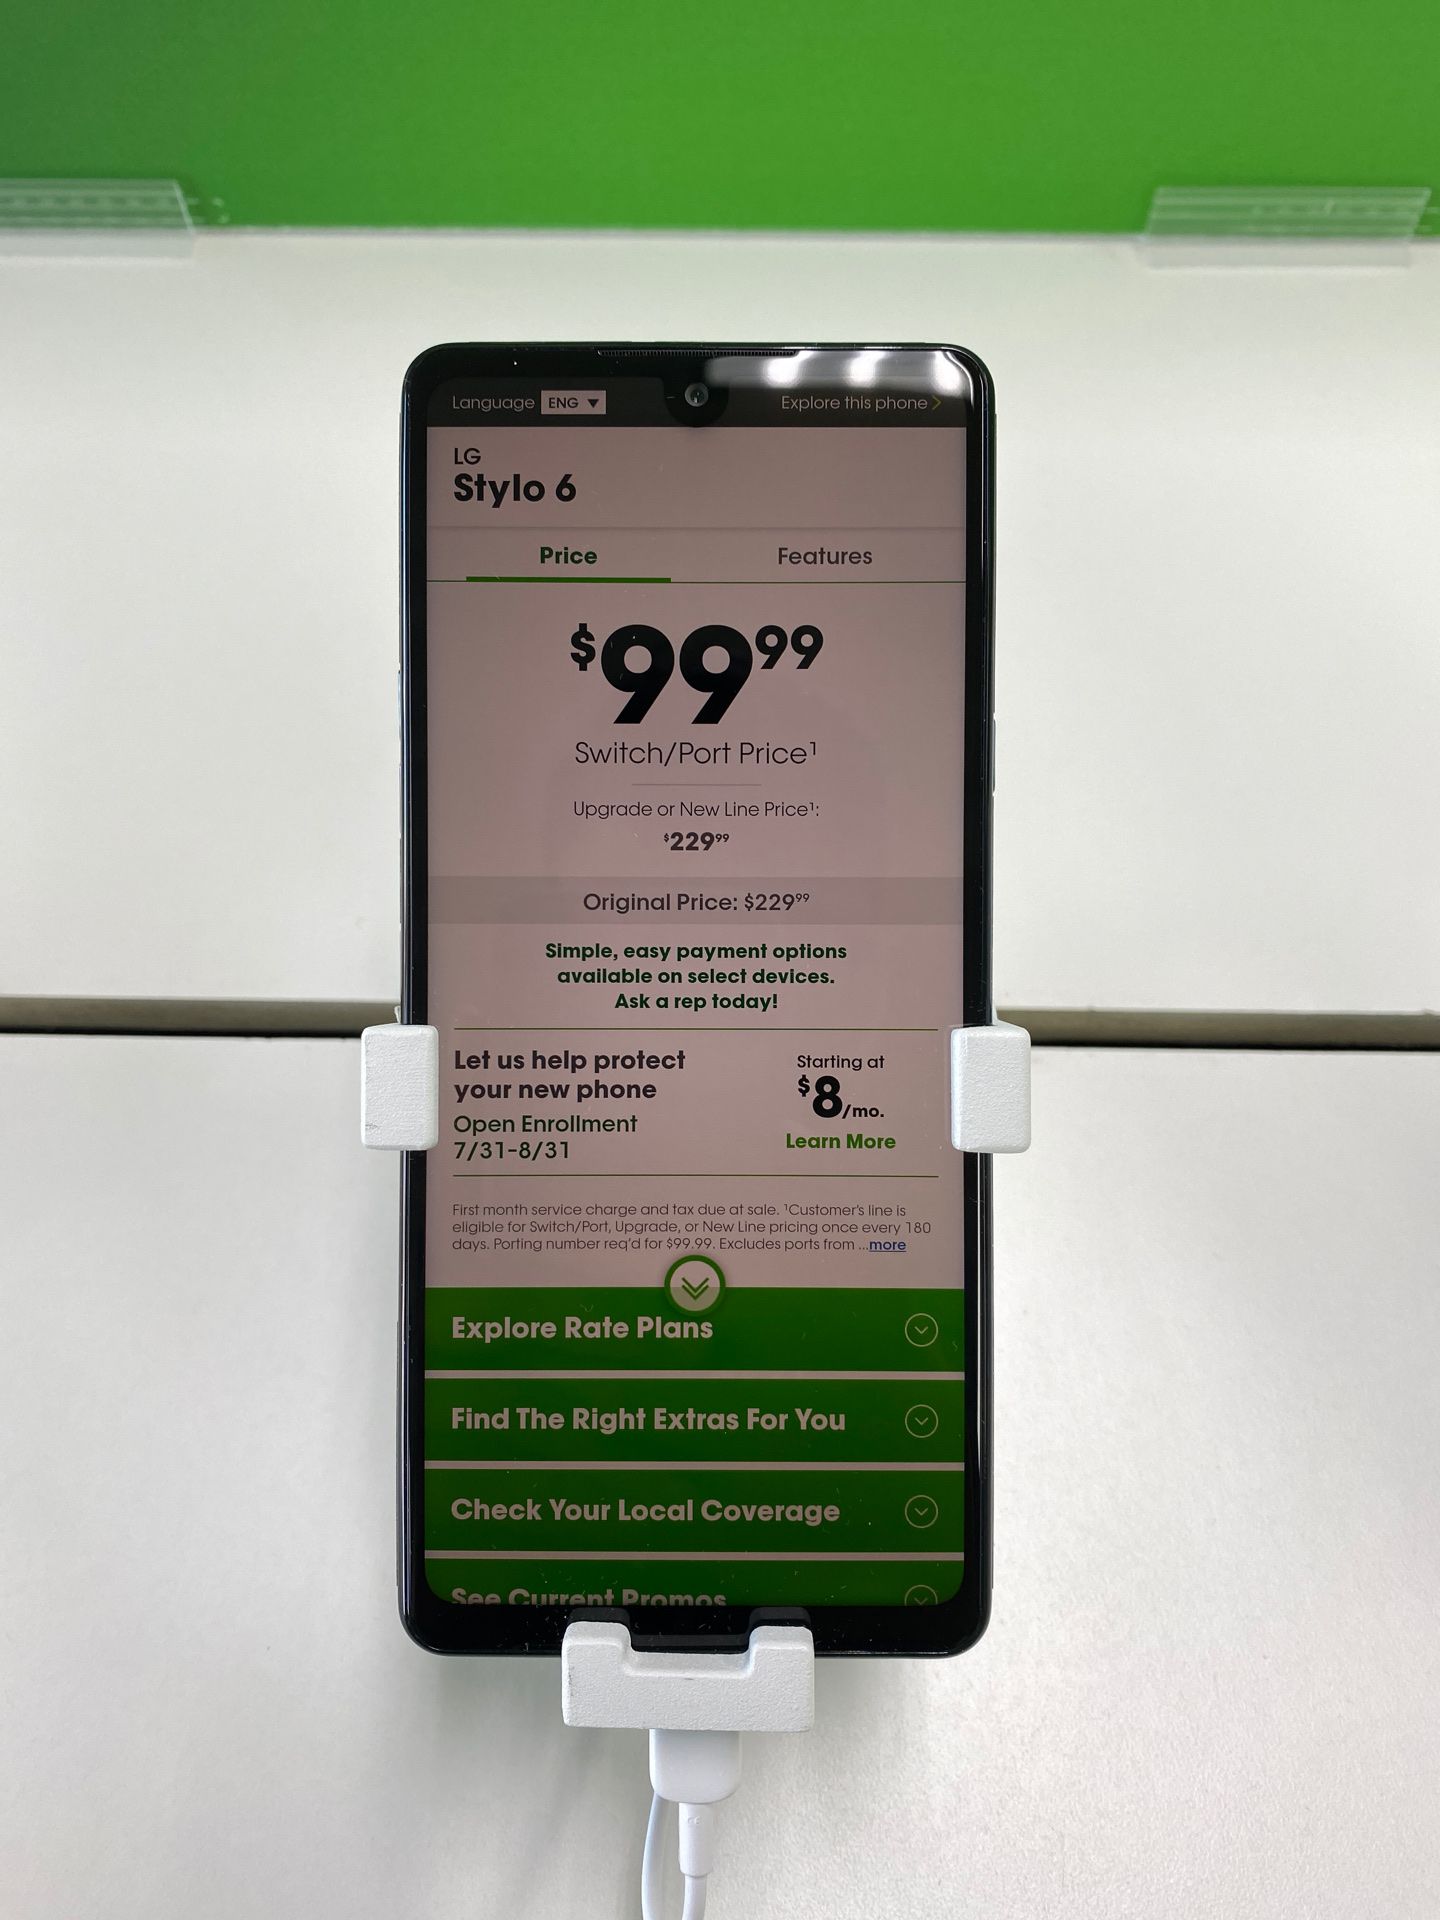 Stylo 6 with Cricket Wireless